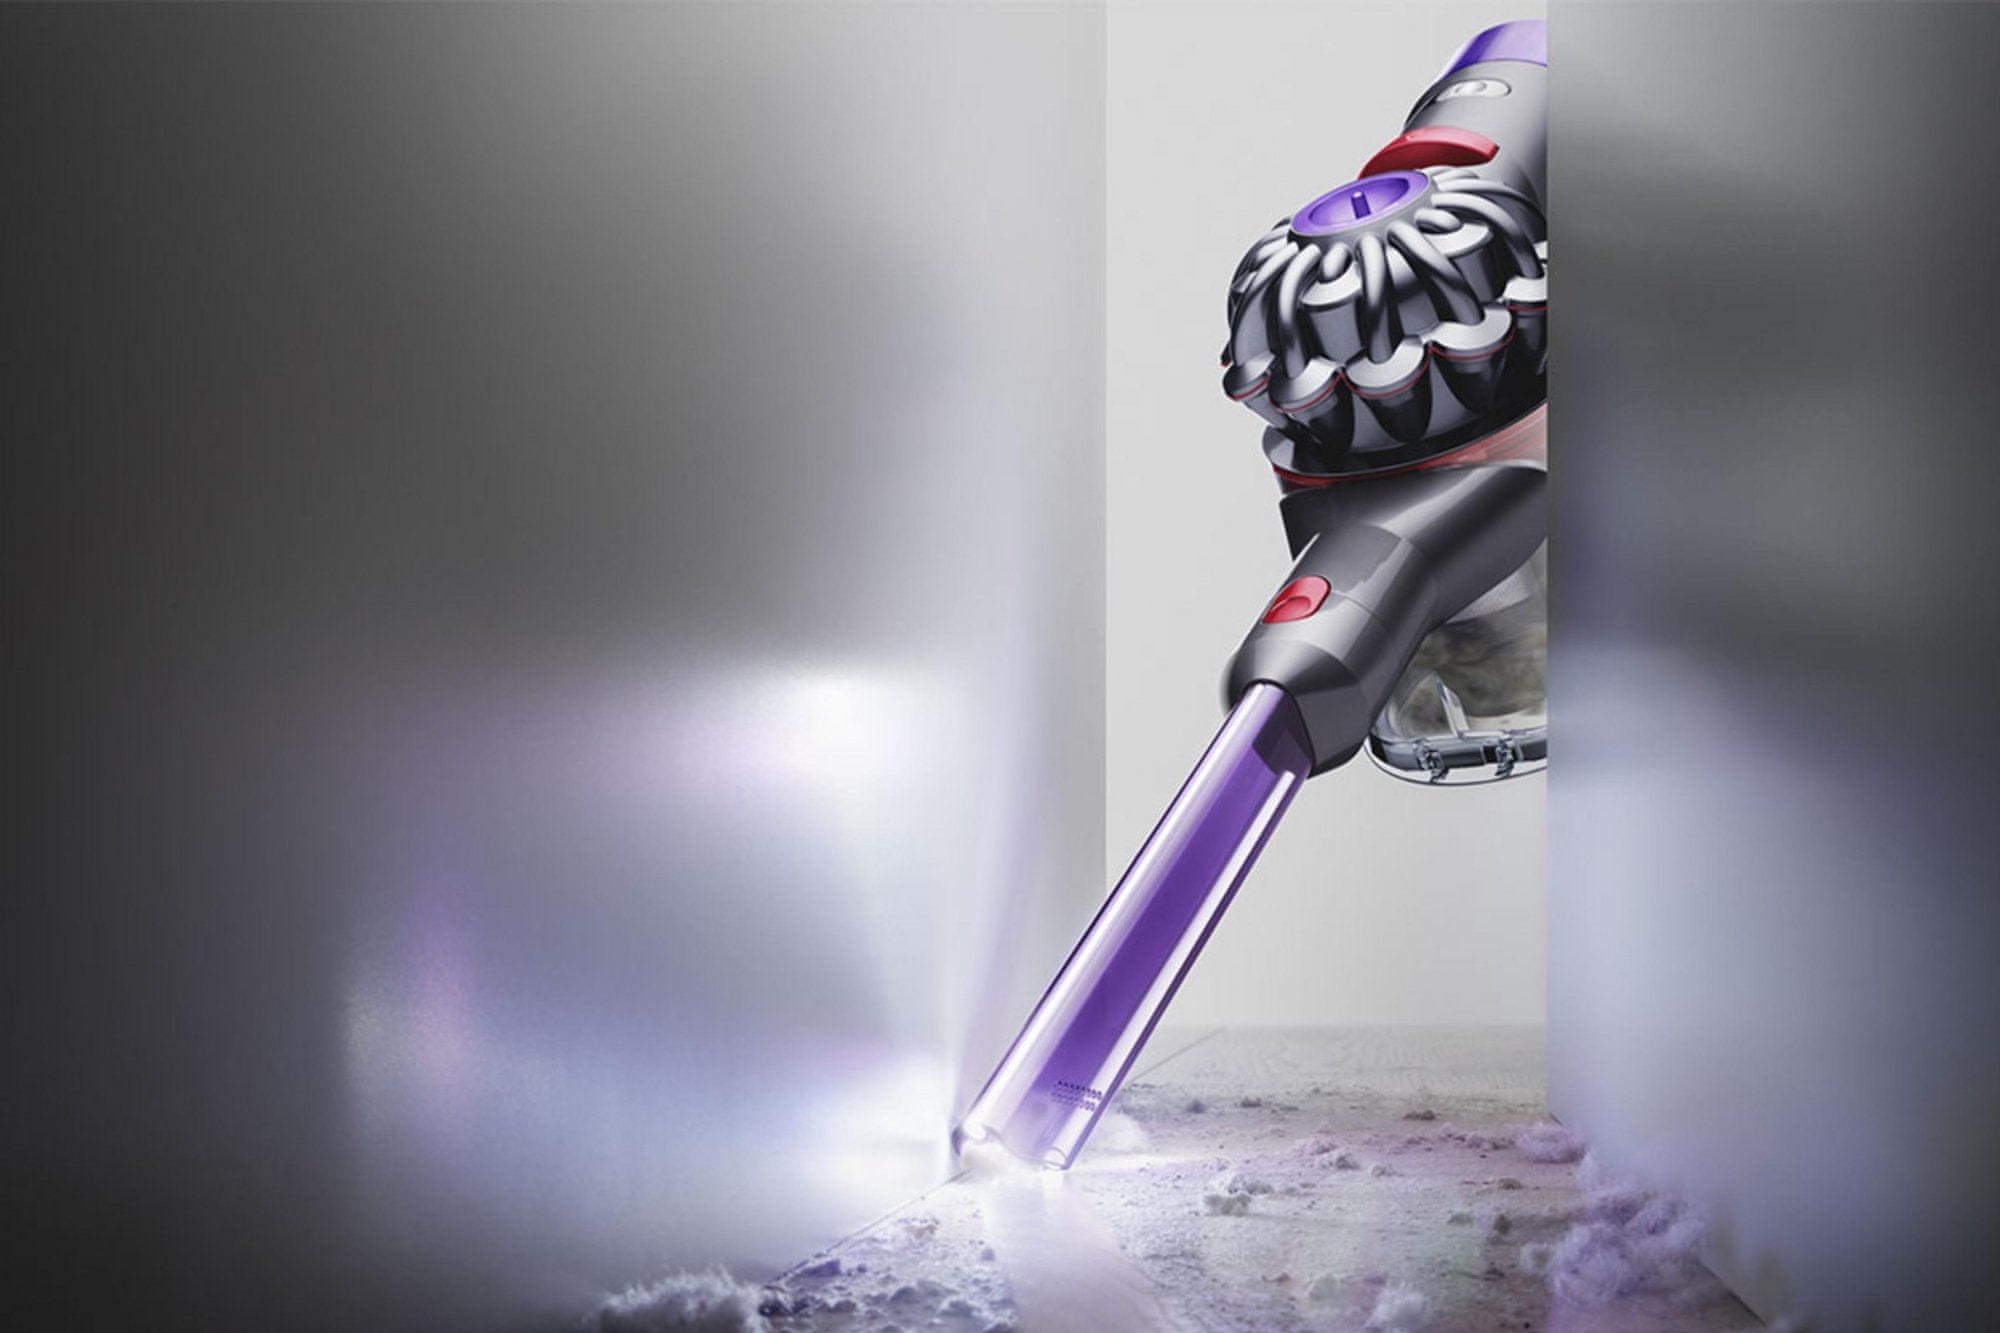  Dyson V8 Absolute+ 